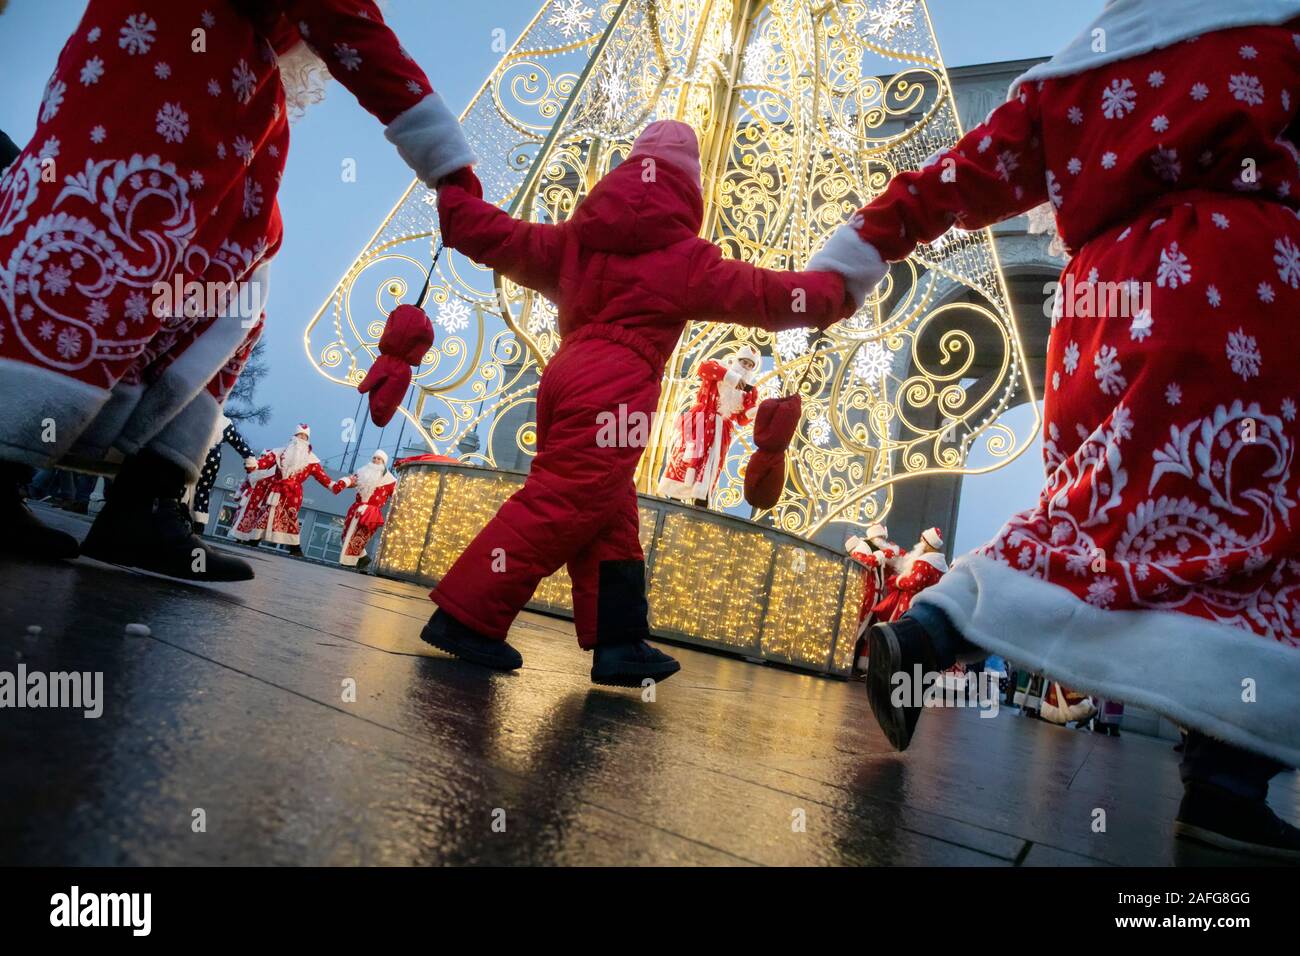 Moscow, Russia. 15th of December, 2019 People in Father Frost costumes lead a round dance  around the Christmas tree during the Father Frosts Festival at VDNKh in Moscow, Russia Stock Photo